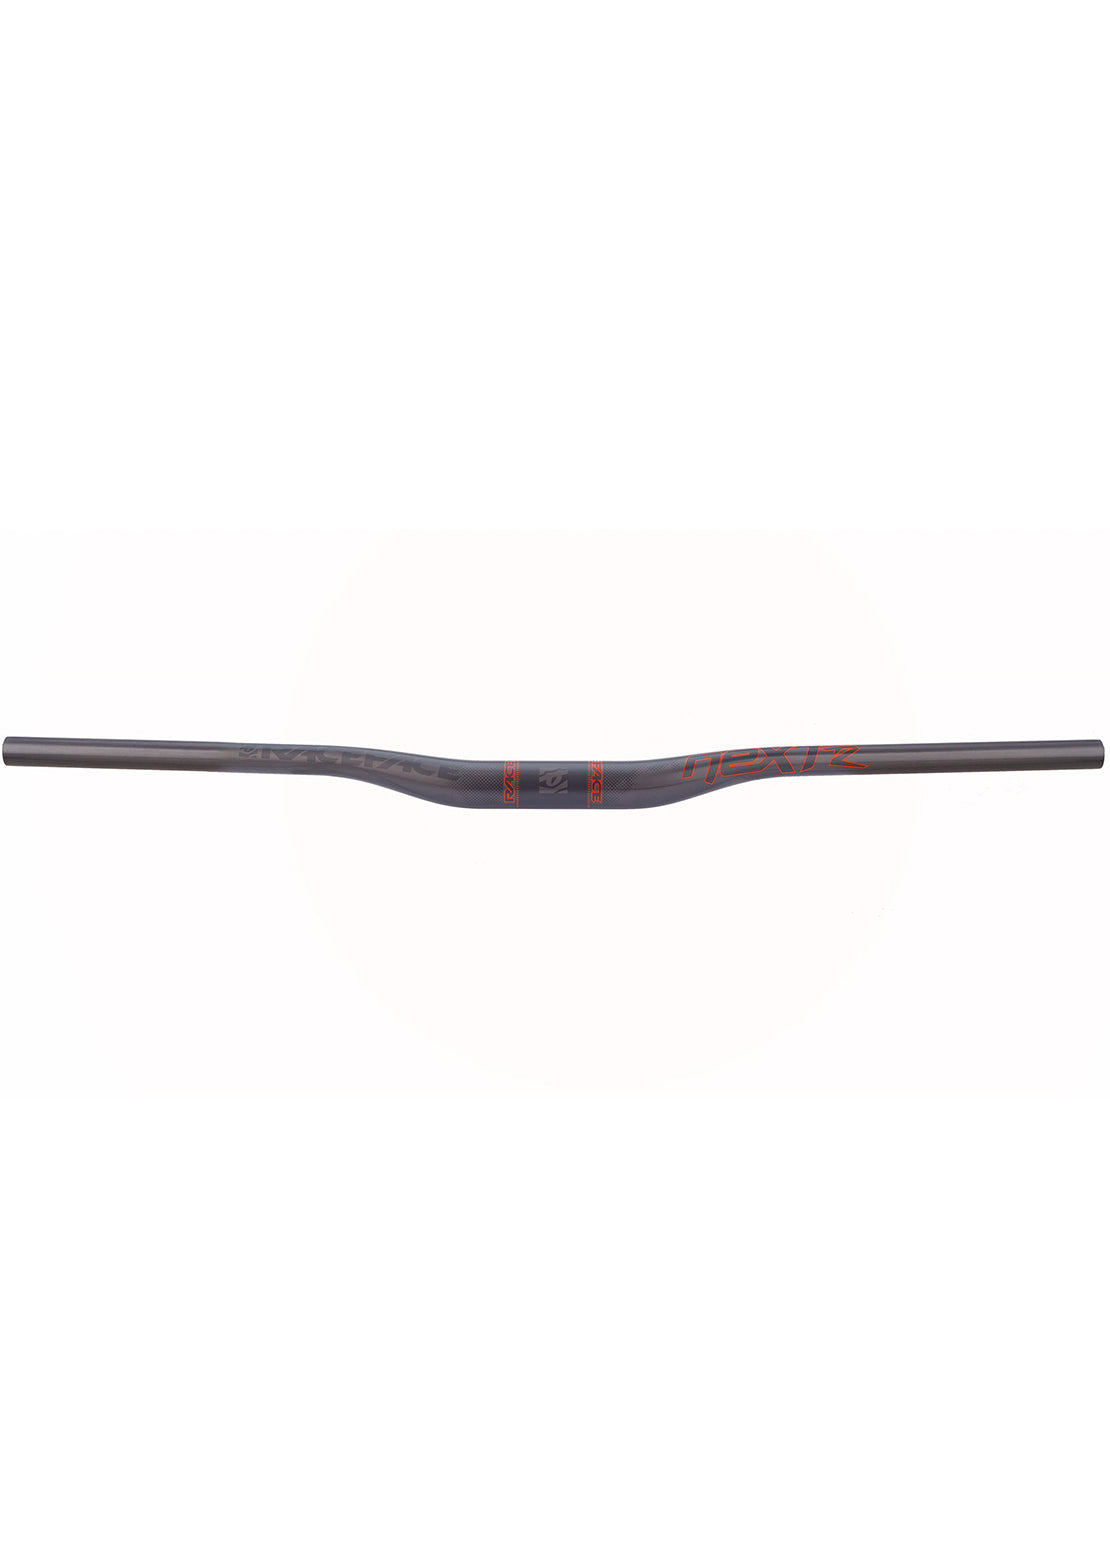 Race Face Next R 35 Handlebar Carbon/Red